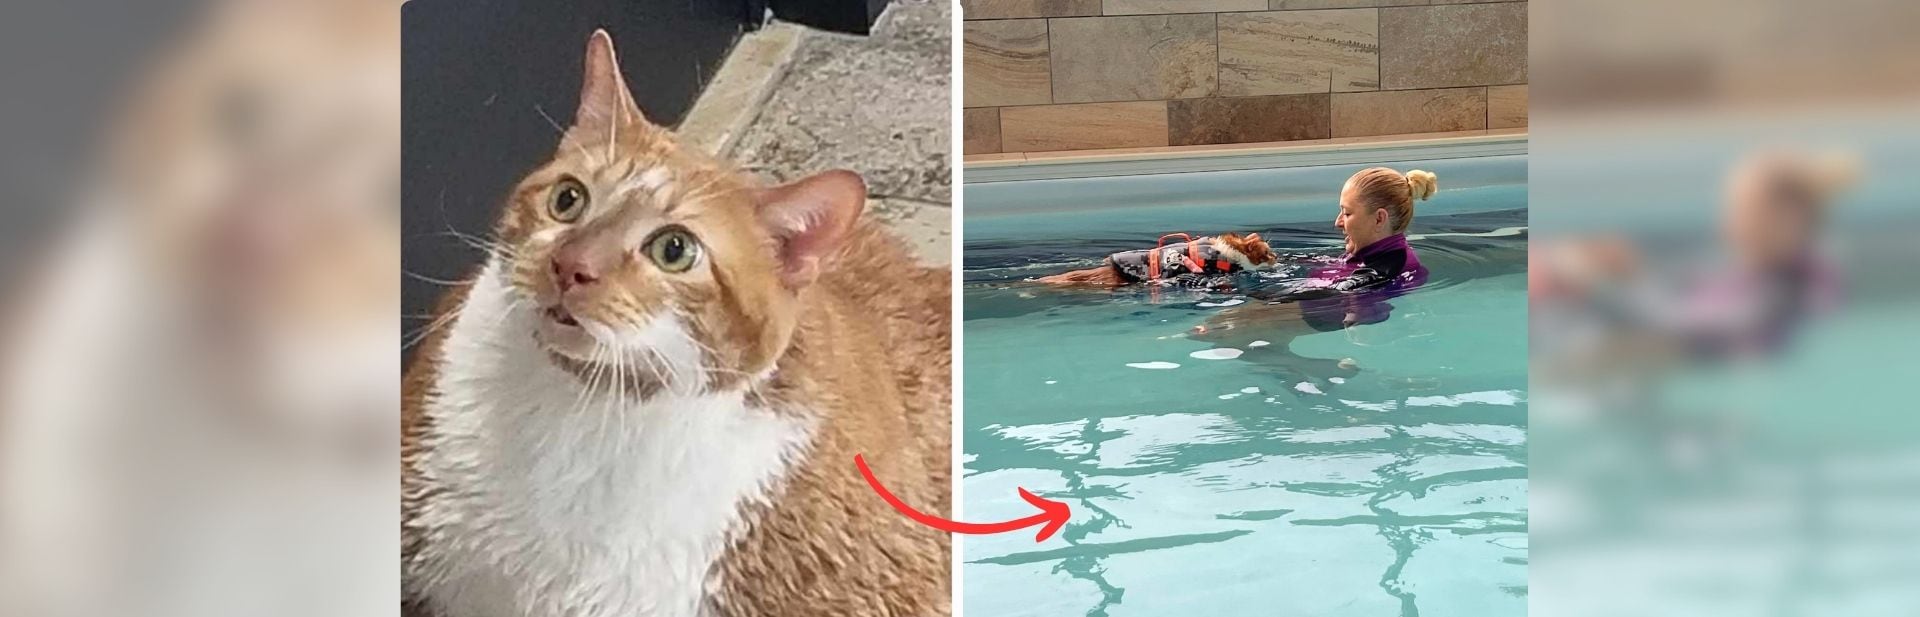 Chubby Cat “Thicken Nugget” is Swimming His Way to a Healthier Future